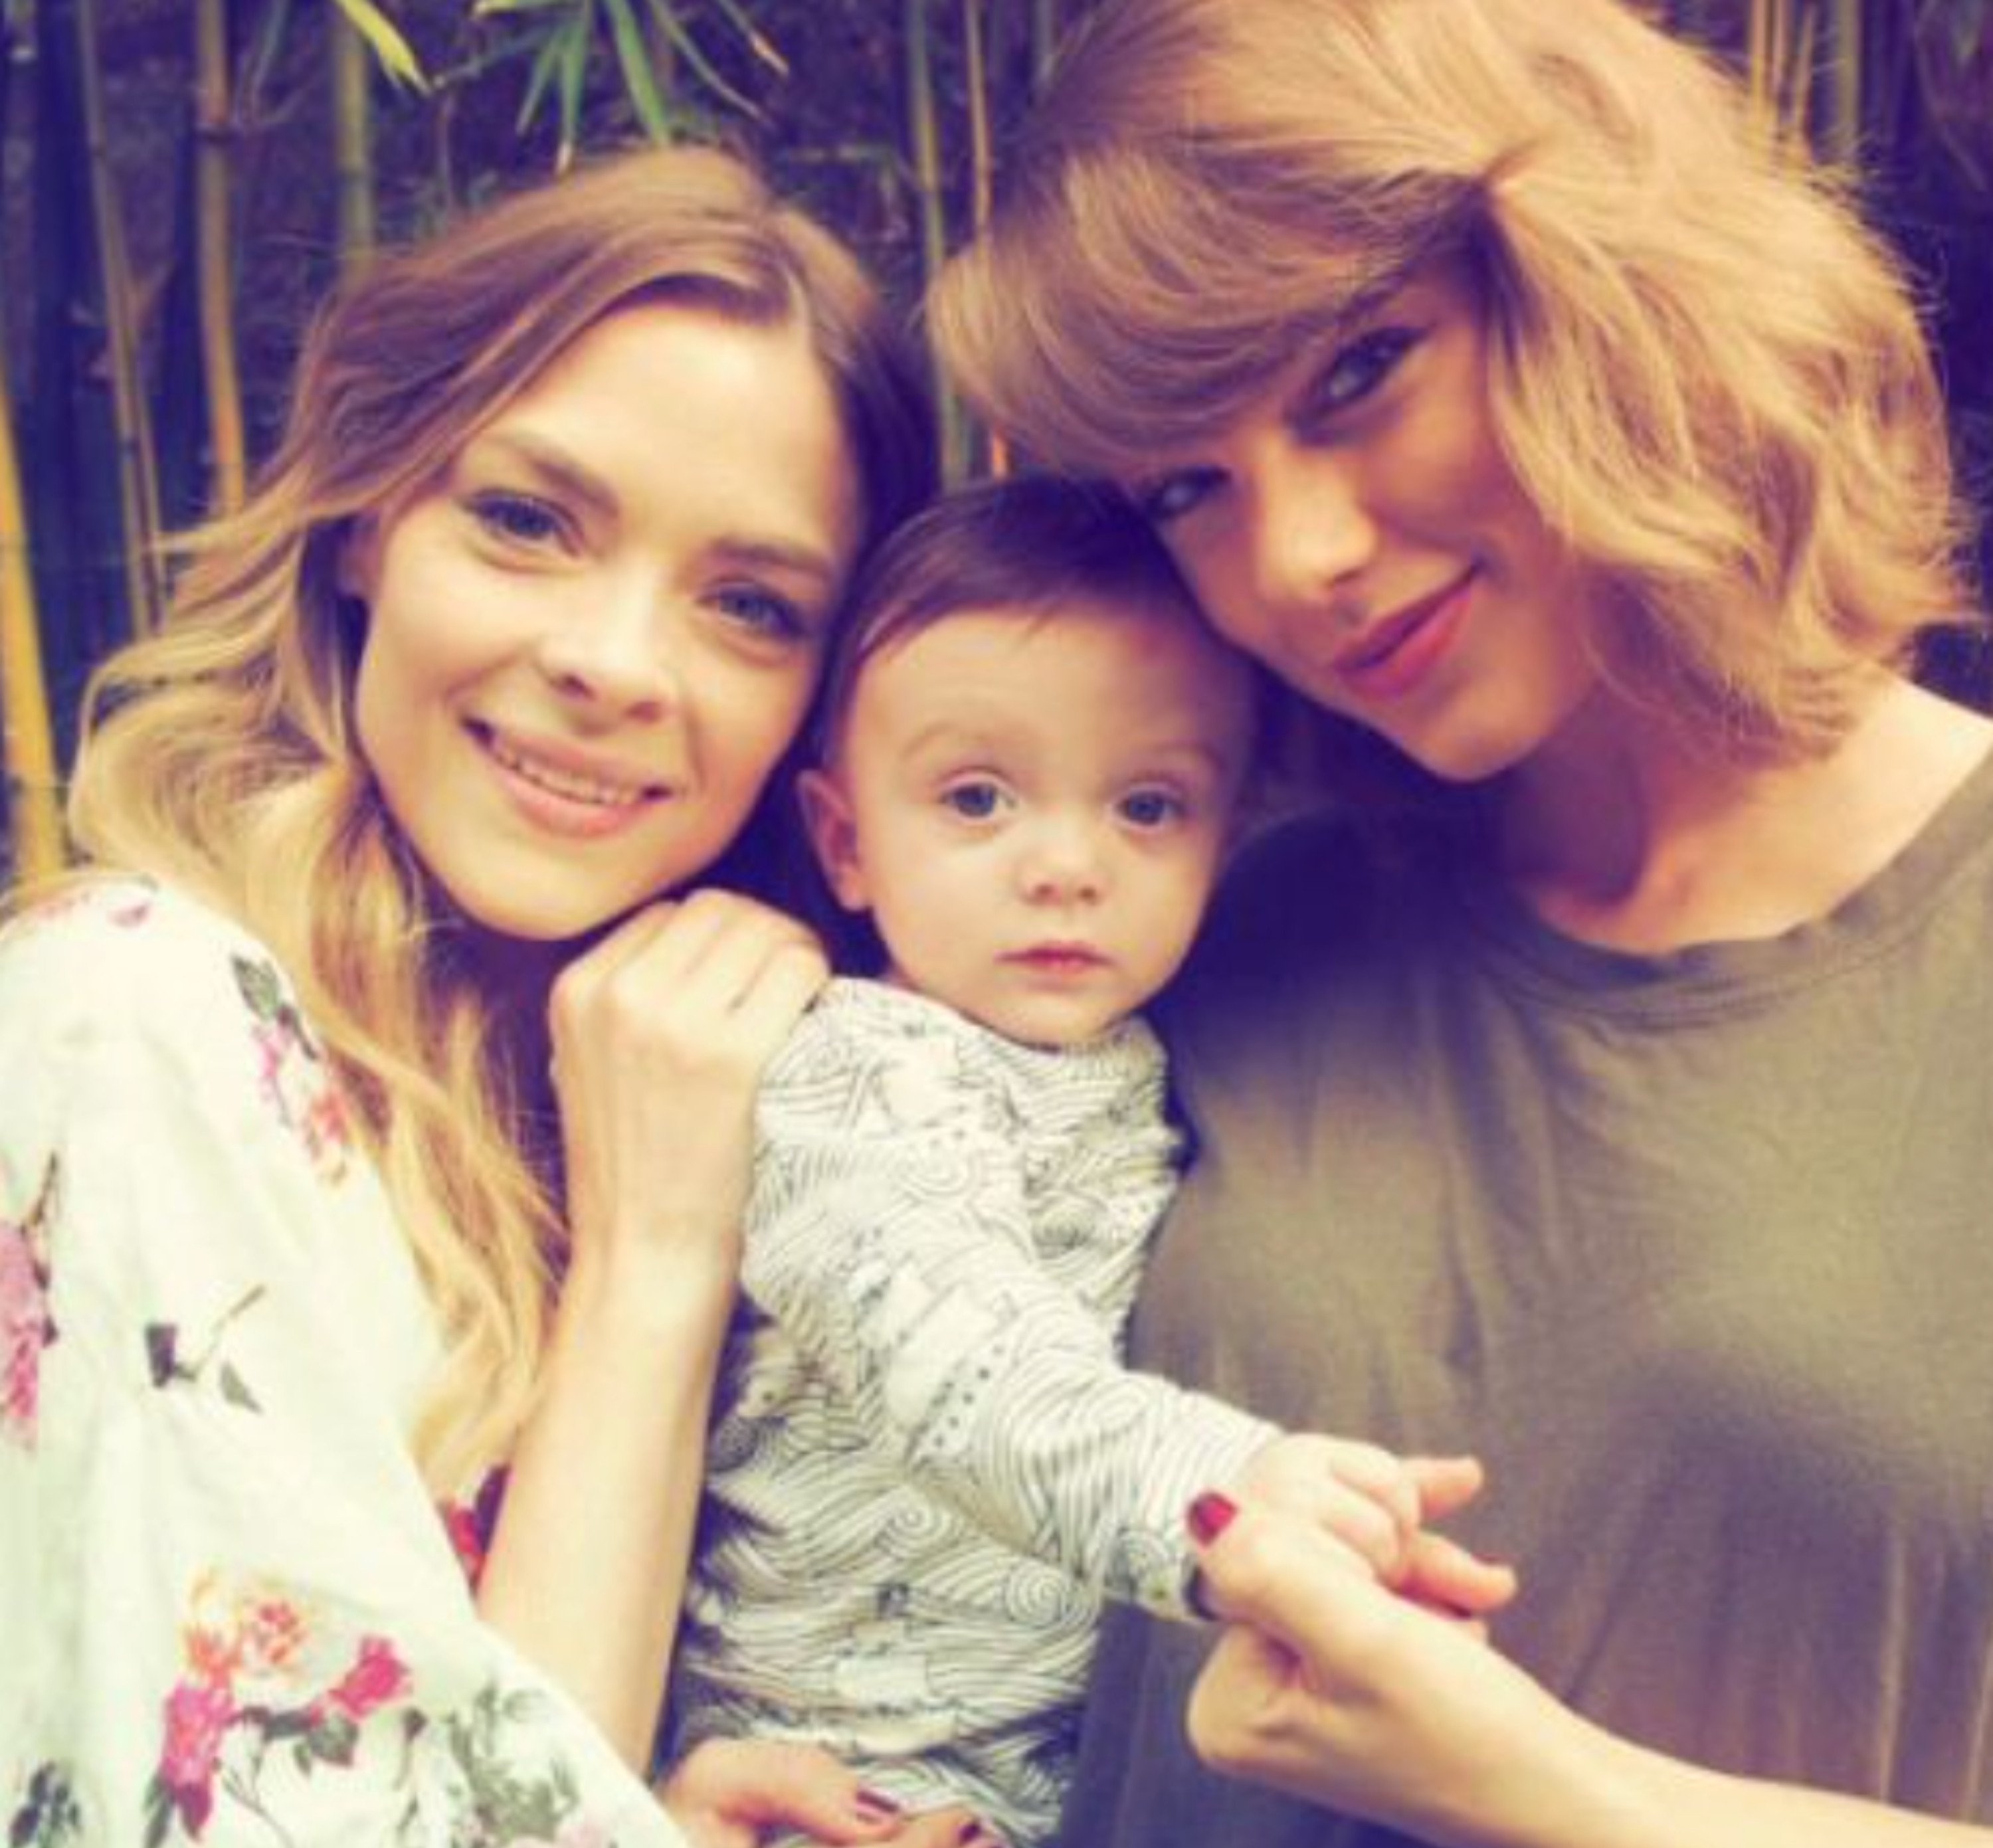 Nineties-famous model Jaime King asked Taylor Swift to be godmother to her son Leo. Photo: Instagram 